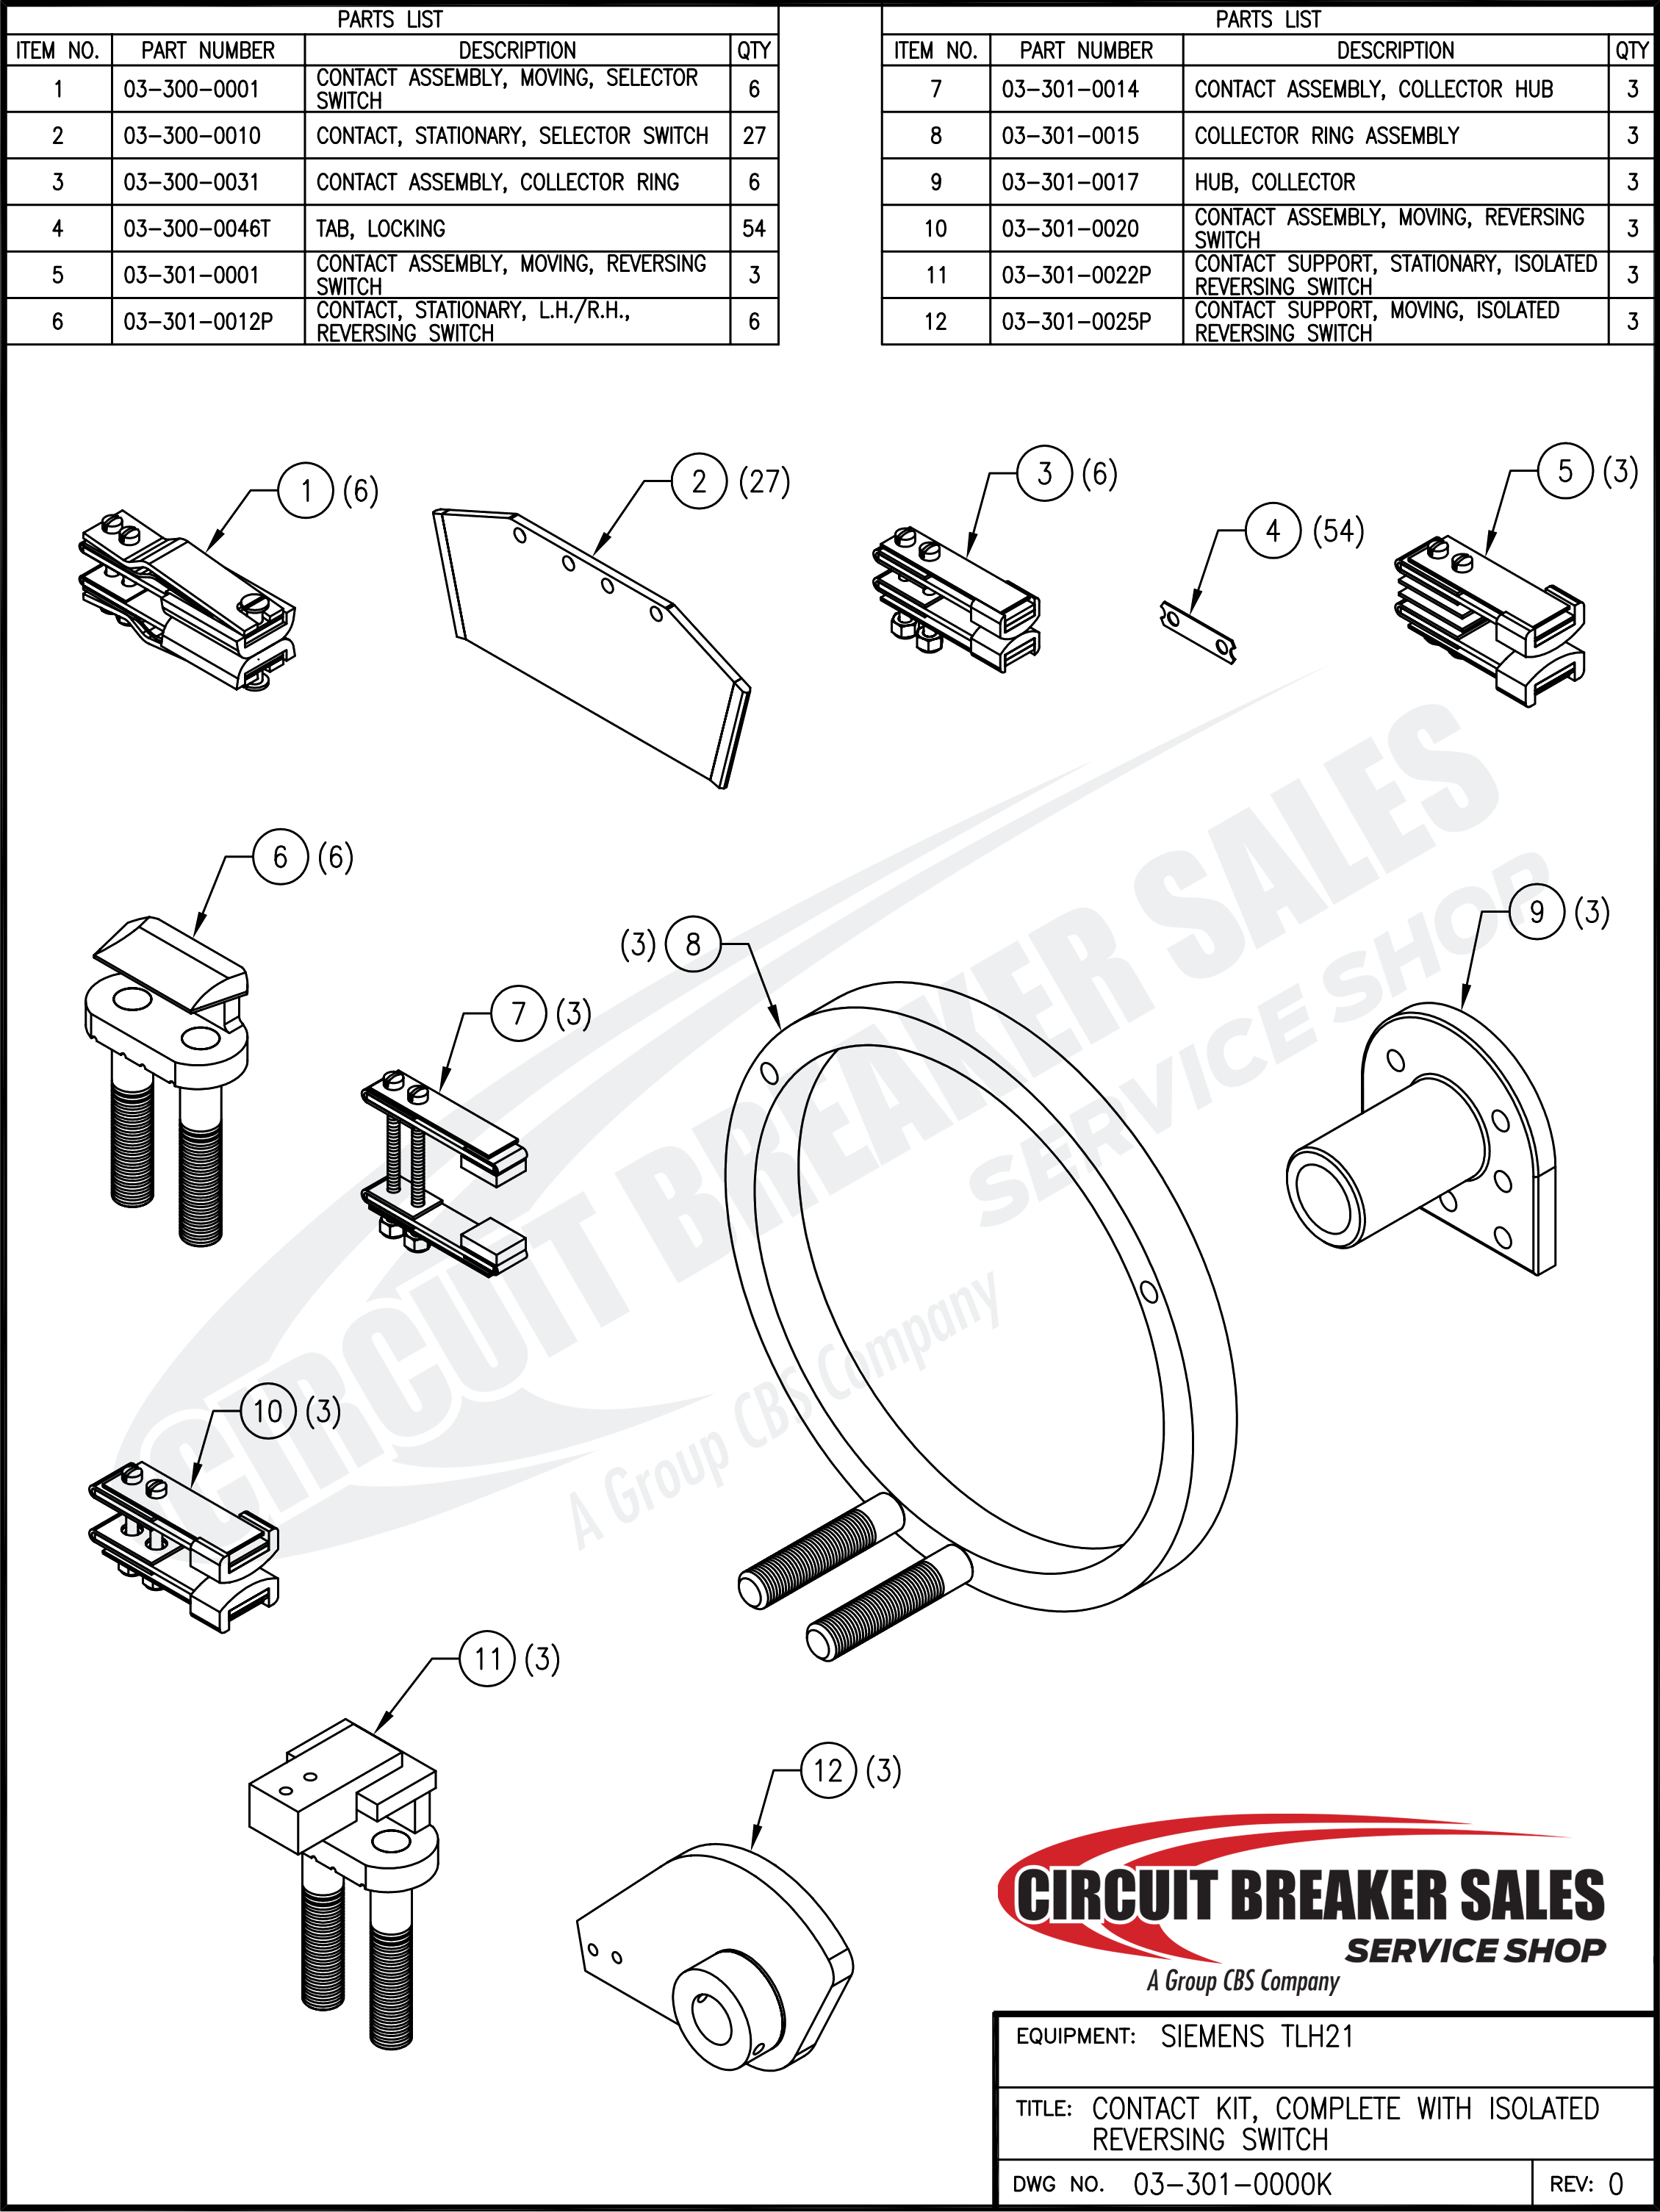 Siemens TLH21 Isolated OEM Kit -  OEM Style Contact Kit for the TLH21 Isolated Reversing Switch